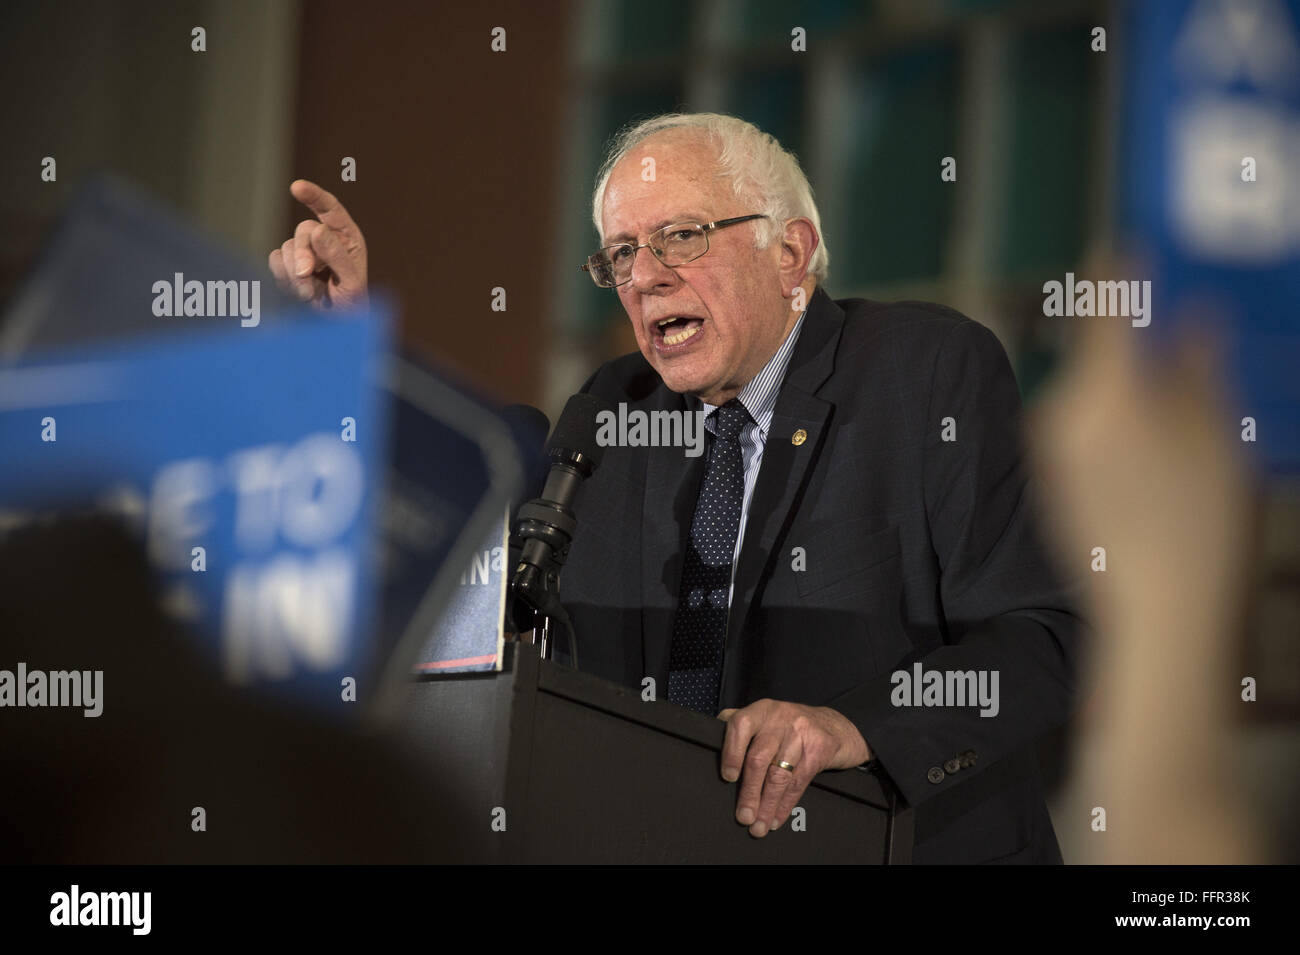 Atlanta, GA, USA. 16th Feb, 2016. Sen. Bernie Sanders campaigns at Morehouse University before massive crowd Tuesday night, seeking to increase support from minority voters weeks before Super Tuesday in March. Credit:  Robin Rayne Nelson/ZUMA Wire/Alamy Live News Stock Photo